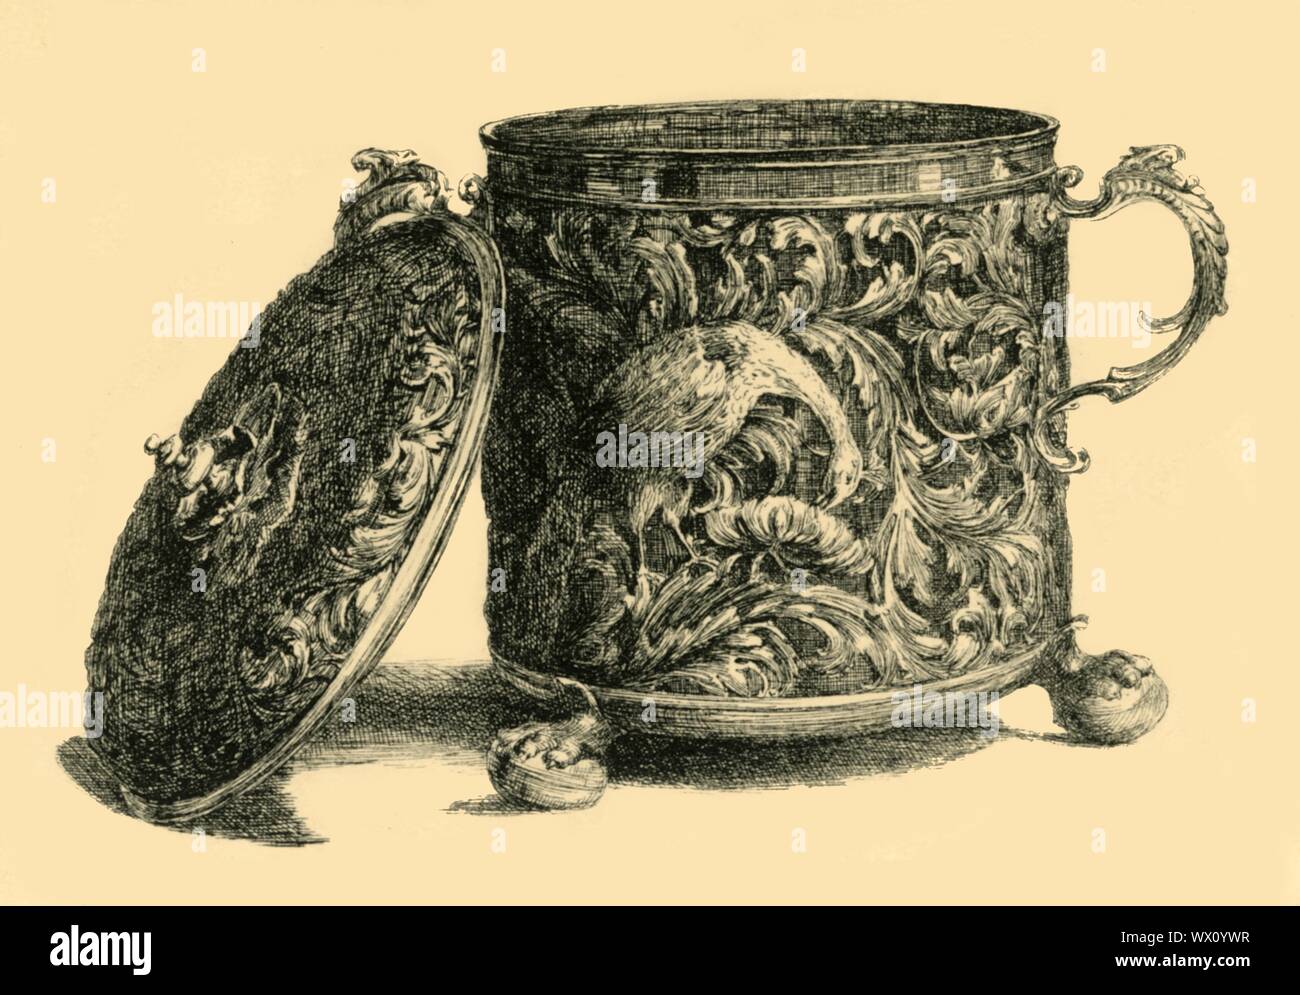 Silver gilt cup and cover, 1669-1670, (1881). Etching of a two-handled cagework presentation cup, made in London in the late 17th century, possibly from the workshop of the Dutch goldsmith Christian van Vianen or his partner Gerard Cooqus, silversmith to King Charles II. It is decorated with stylised foliage and a bird - possibly a peacock - and is supported on clawed feet. From &quot;The South Kensington Museum&quot;, a book of engraved illustrations, with descriptions, of the works of art in the collection of the Victoria &amp; Albert Museum in London (formerly known as the South Kensington Stock Photo